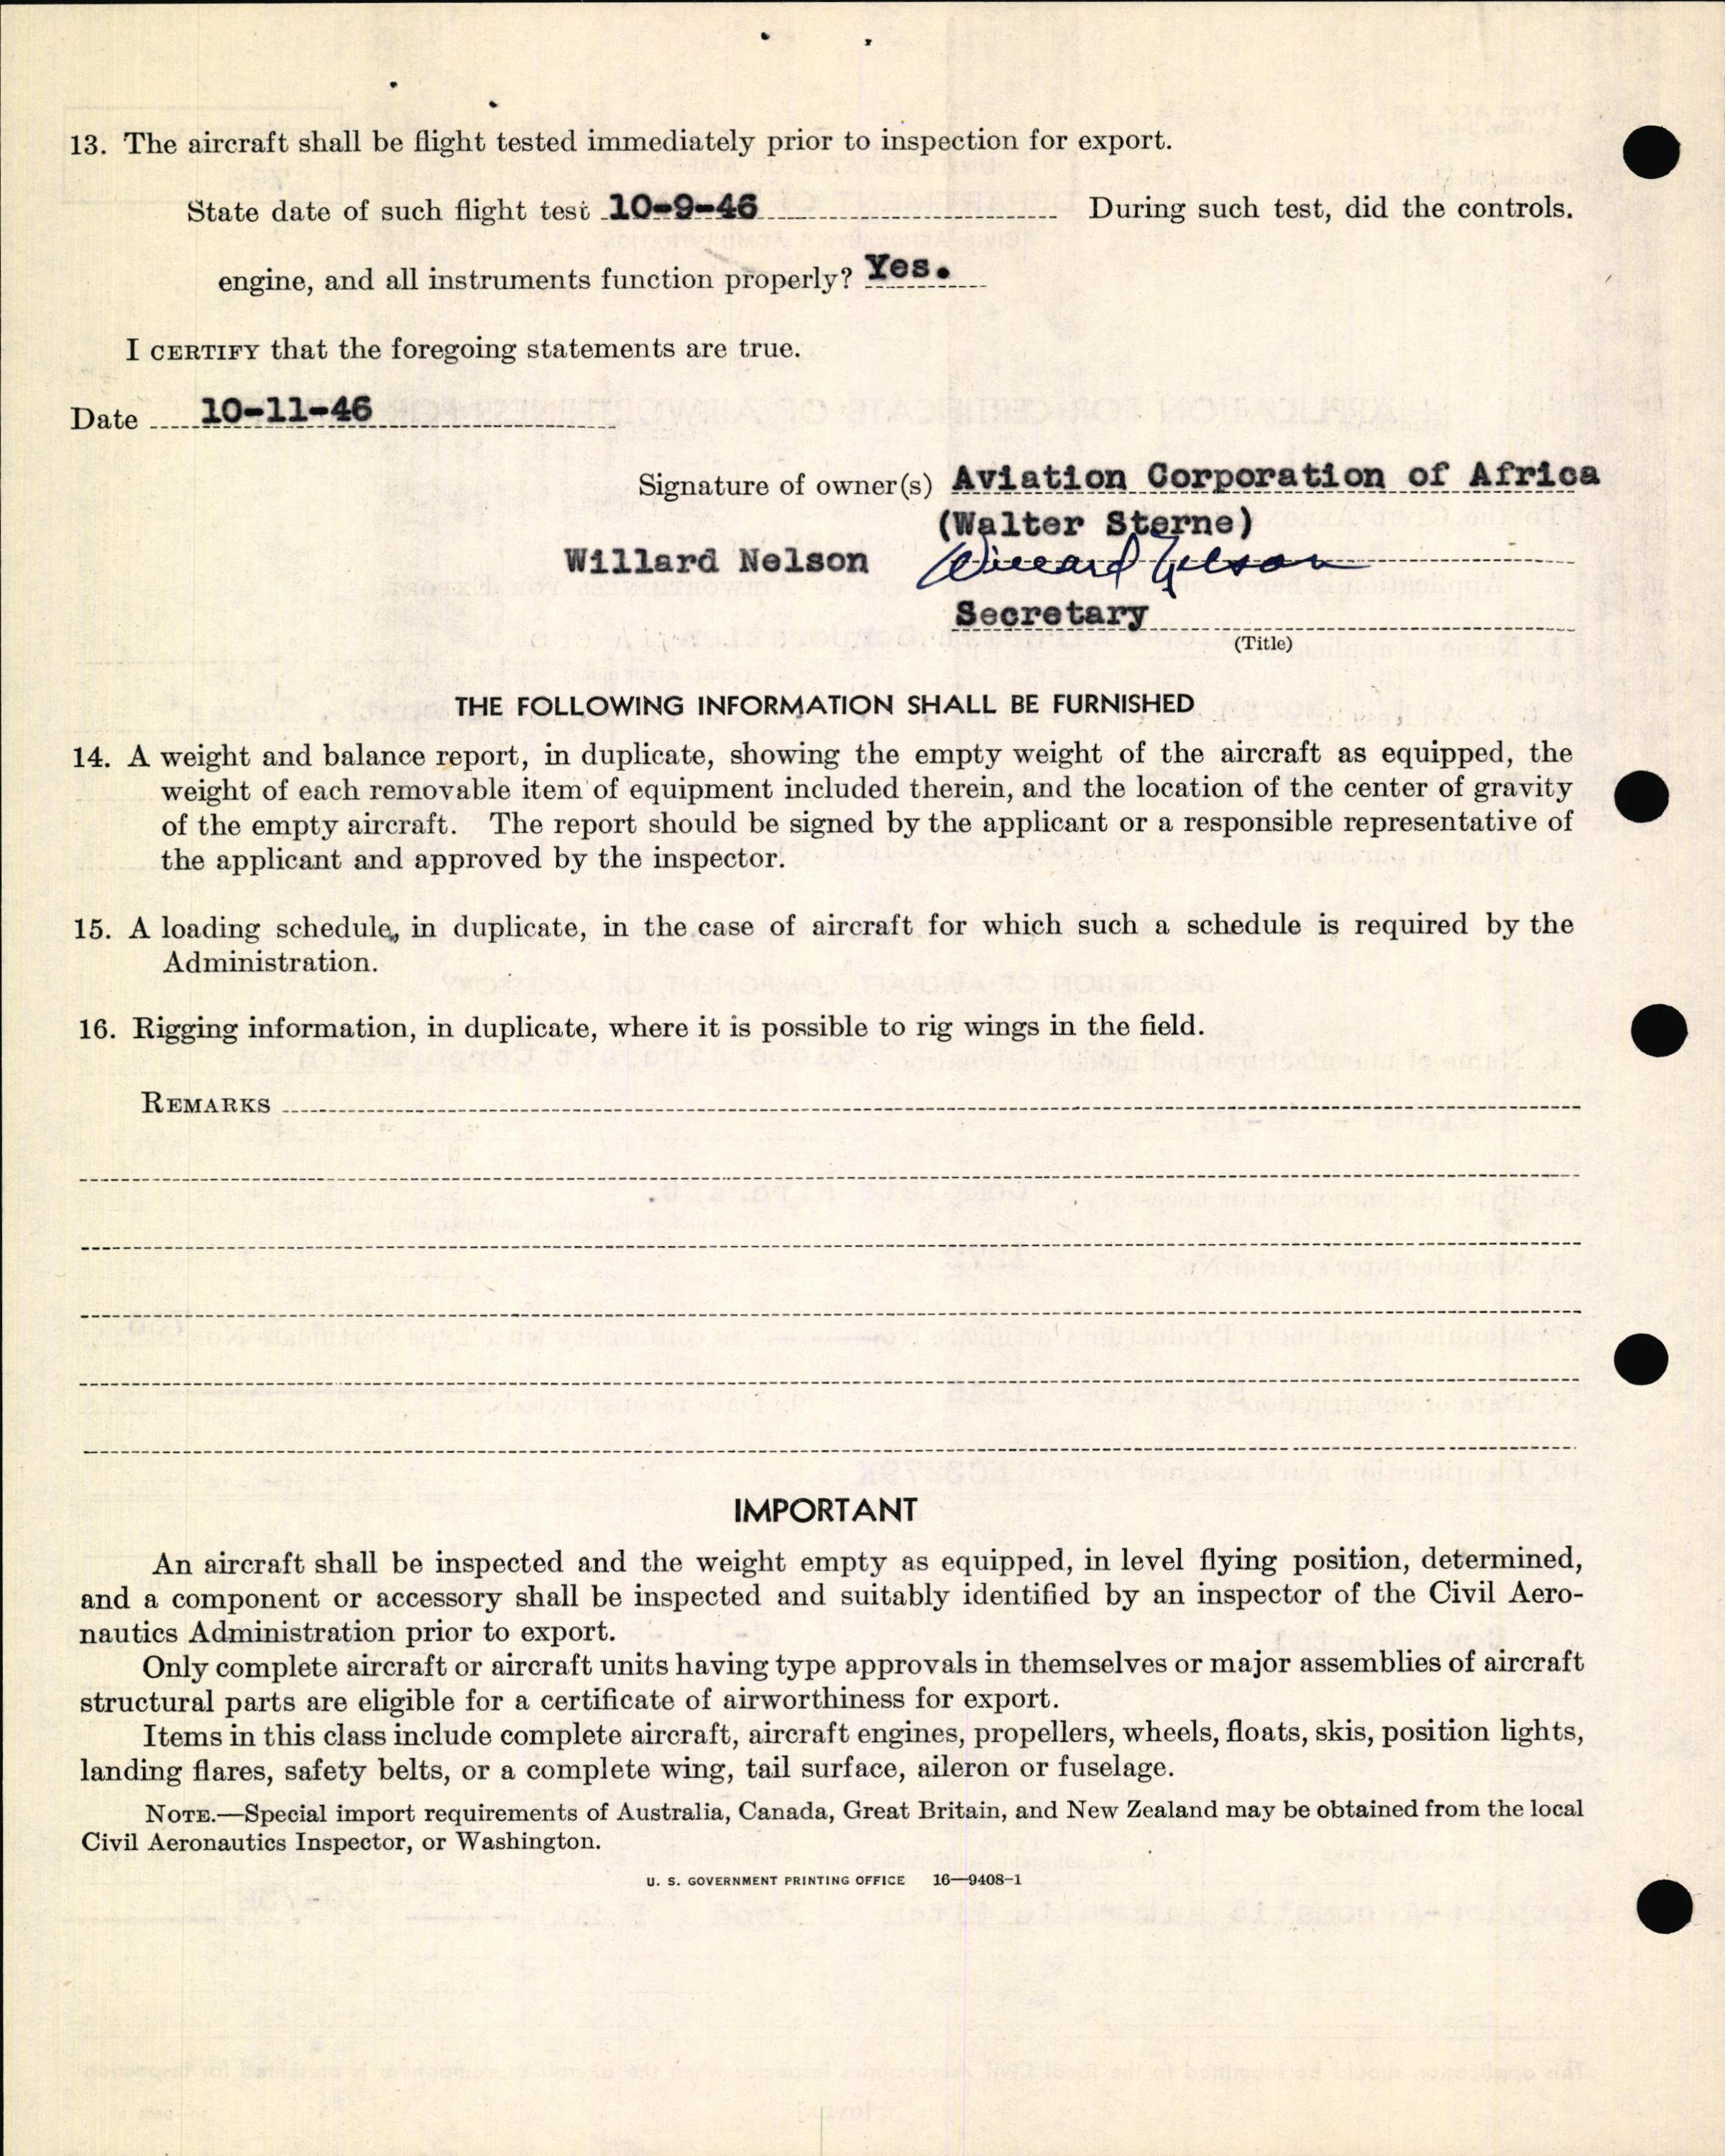 Sample page 6 from AirCorps Library document: Technical Information for Serial Number 1272